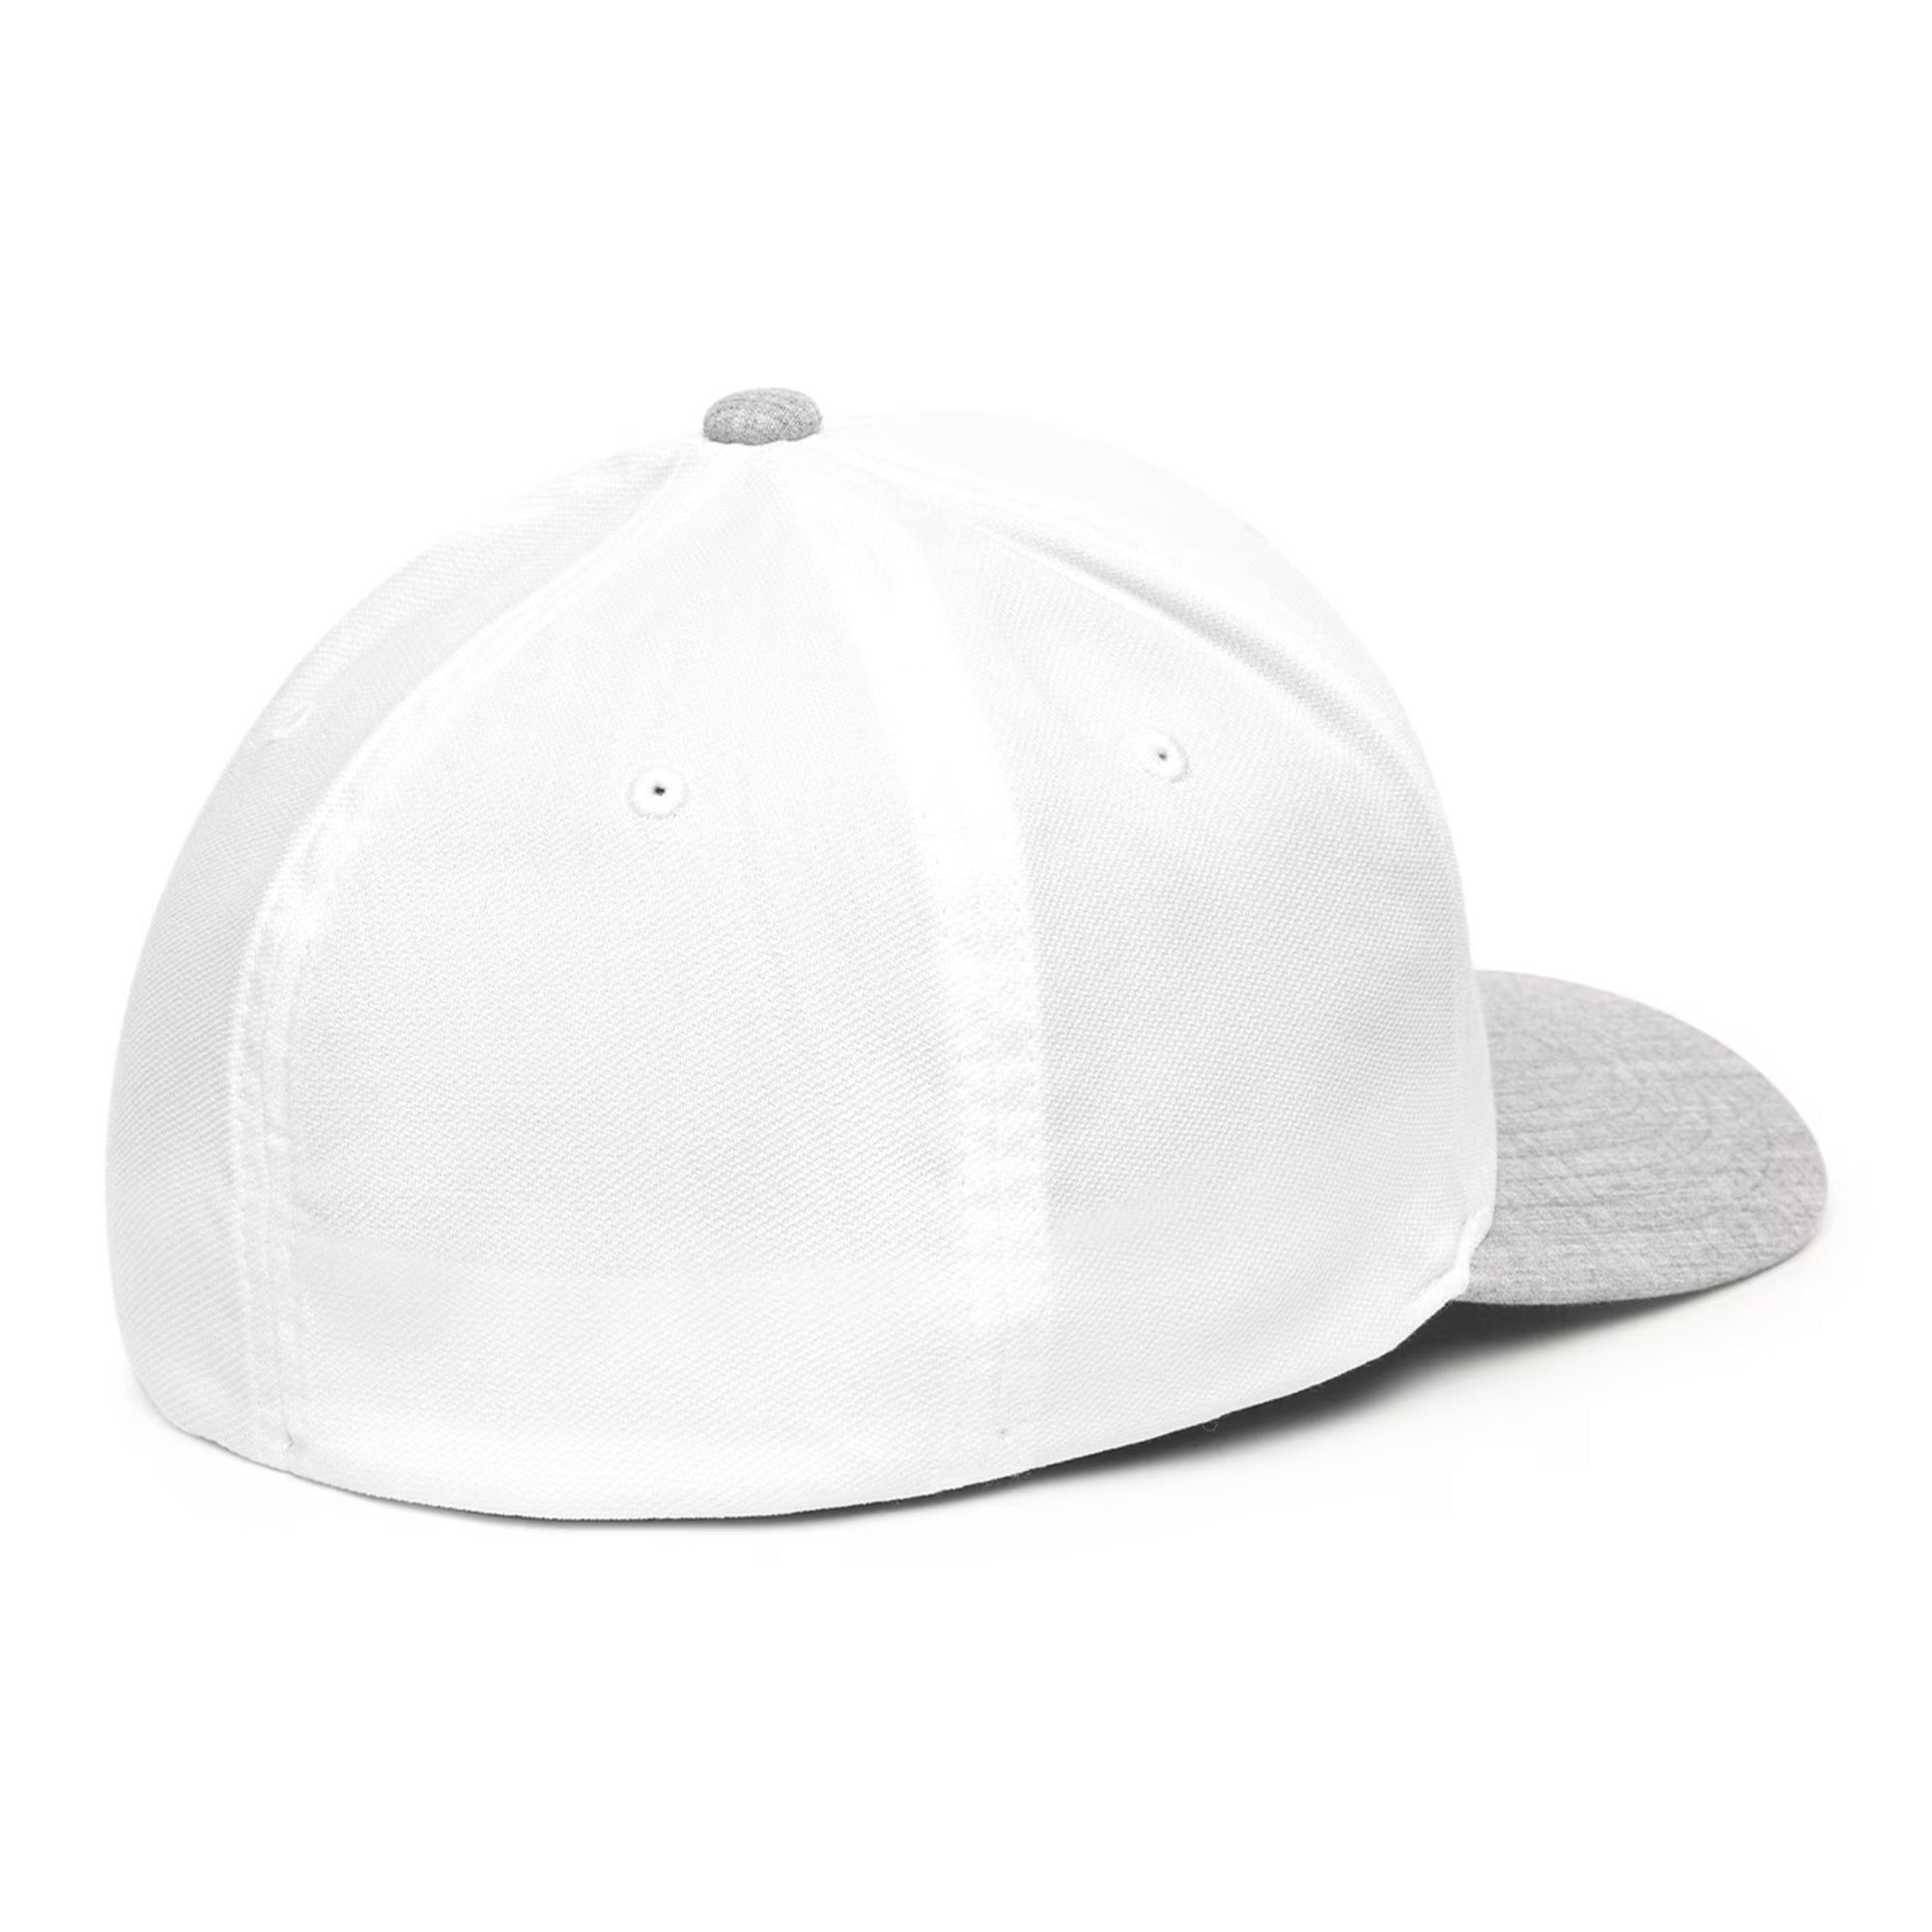 TravisMathew Onboard Entertainment Fitted Cap 1MZ146 White & Function18